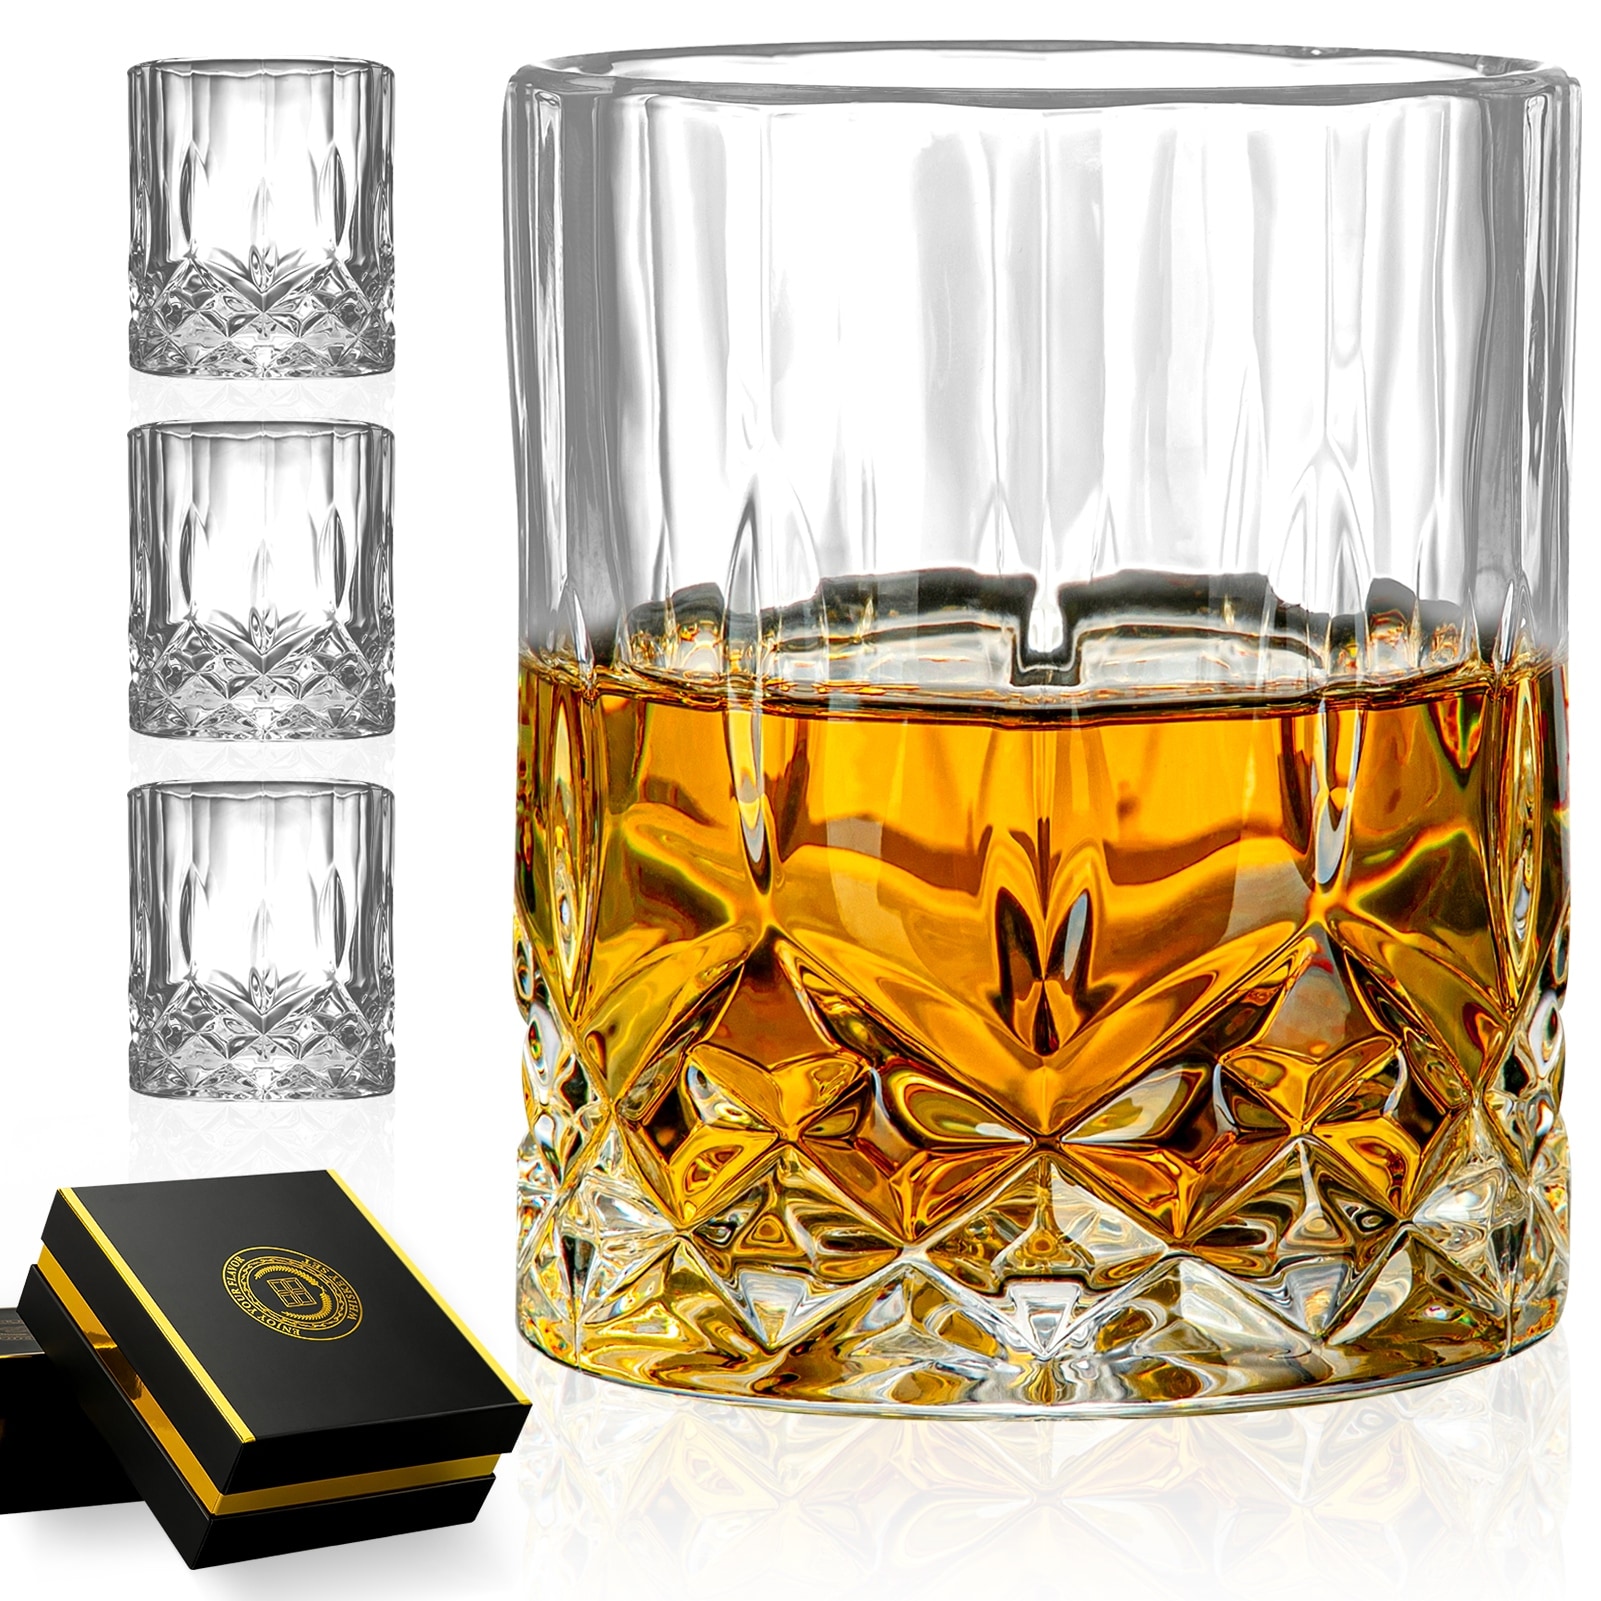 https://ak1.ostkcdn.com/images/products/is/images/direct/35c988ebefd23230f3998b12dcfa83f09f4f8111/10-Oz-Whiskey-Glasses%2C-Set-of-4.jpg